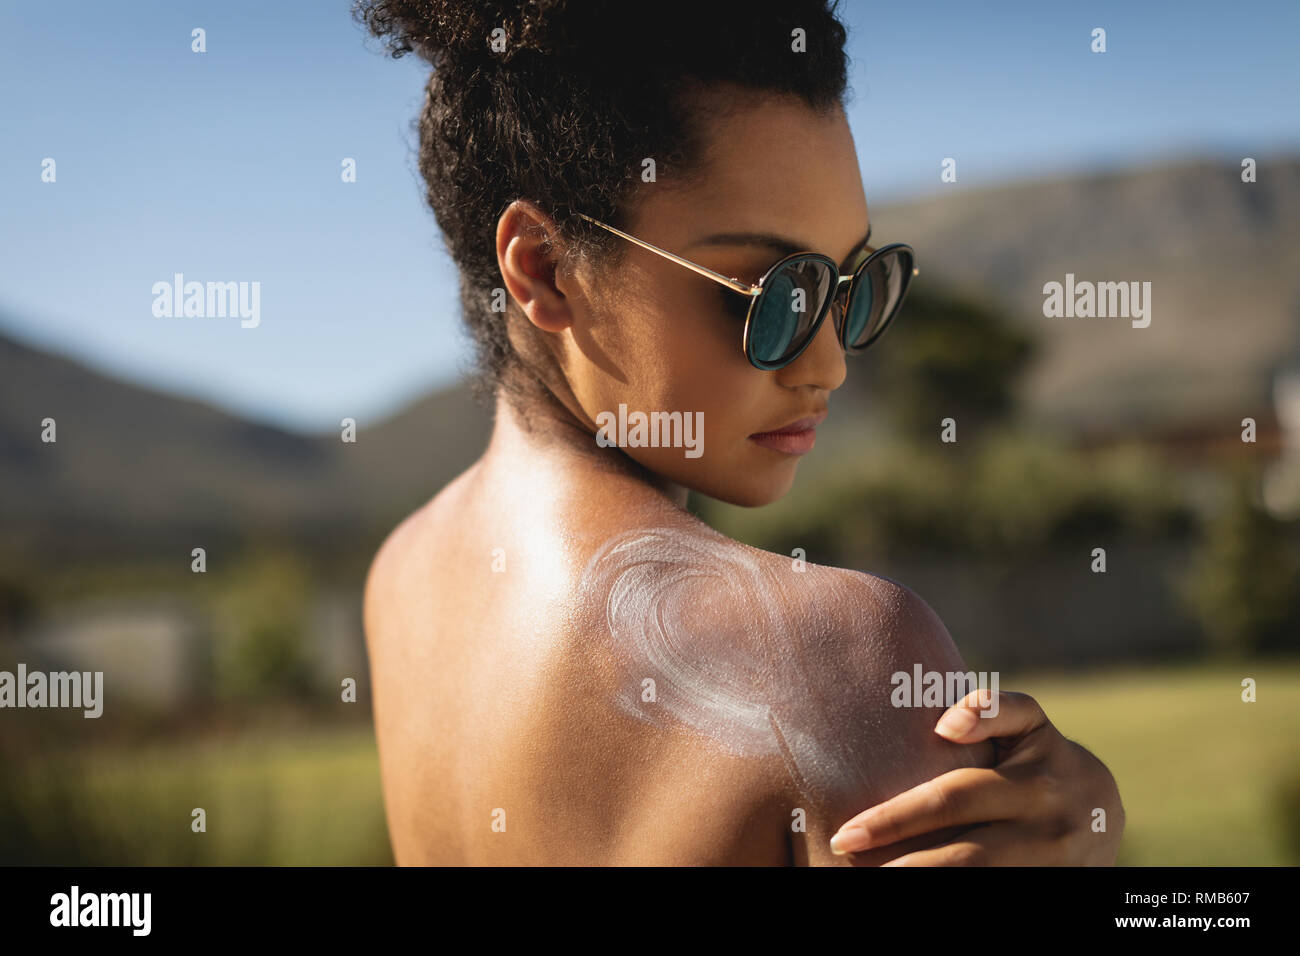 Young mixed-race woman rubbing sunscreen on shoulders Stock Photo